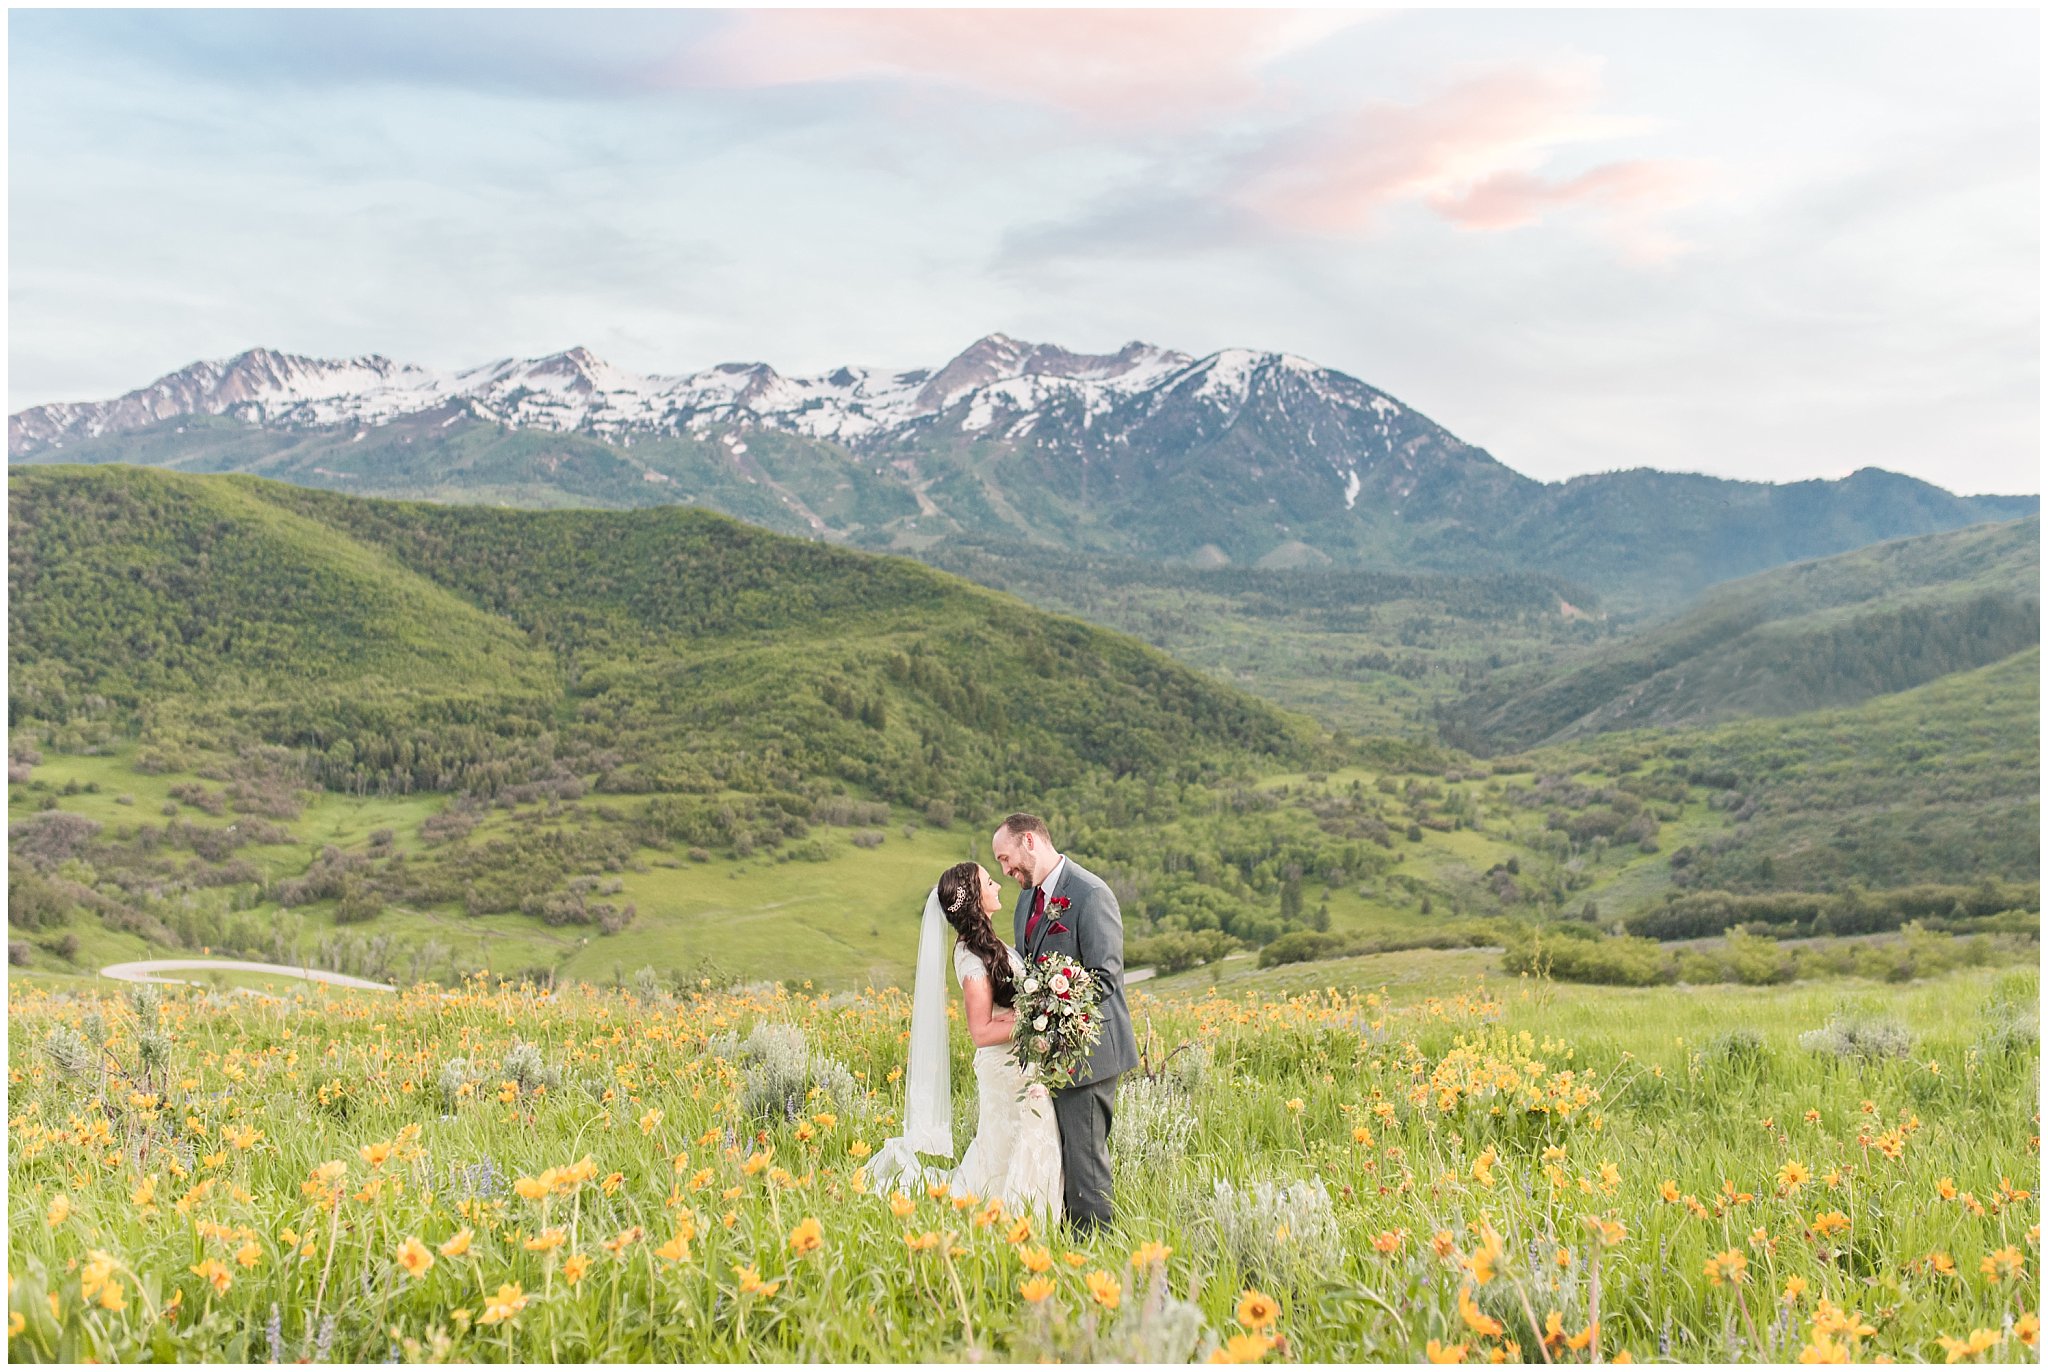 Bride and groom portraits in the mountains with a sunset | Groom in grey suit and bride in beige and white dress with waterfall bouquet | Snowbasin Summer Formal Session | Utah Wedding Photographers | Jessie and Dallin